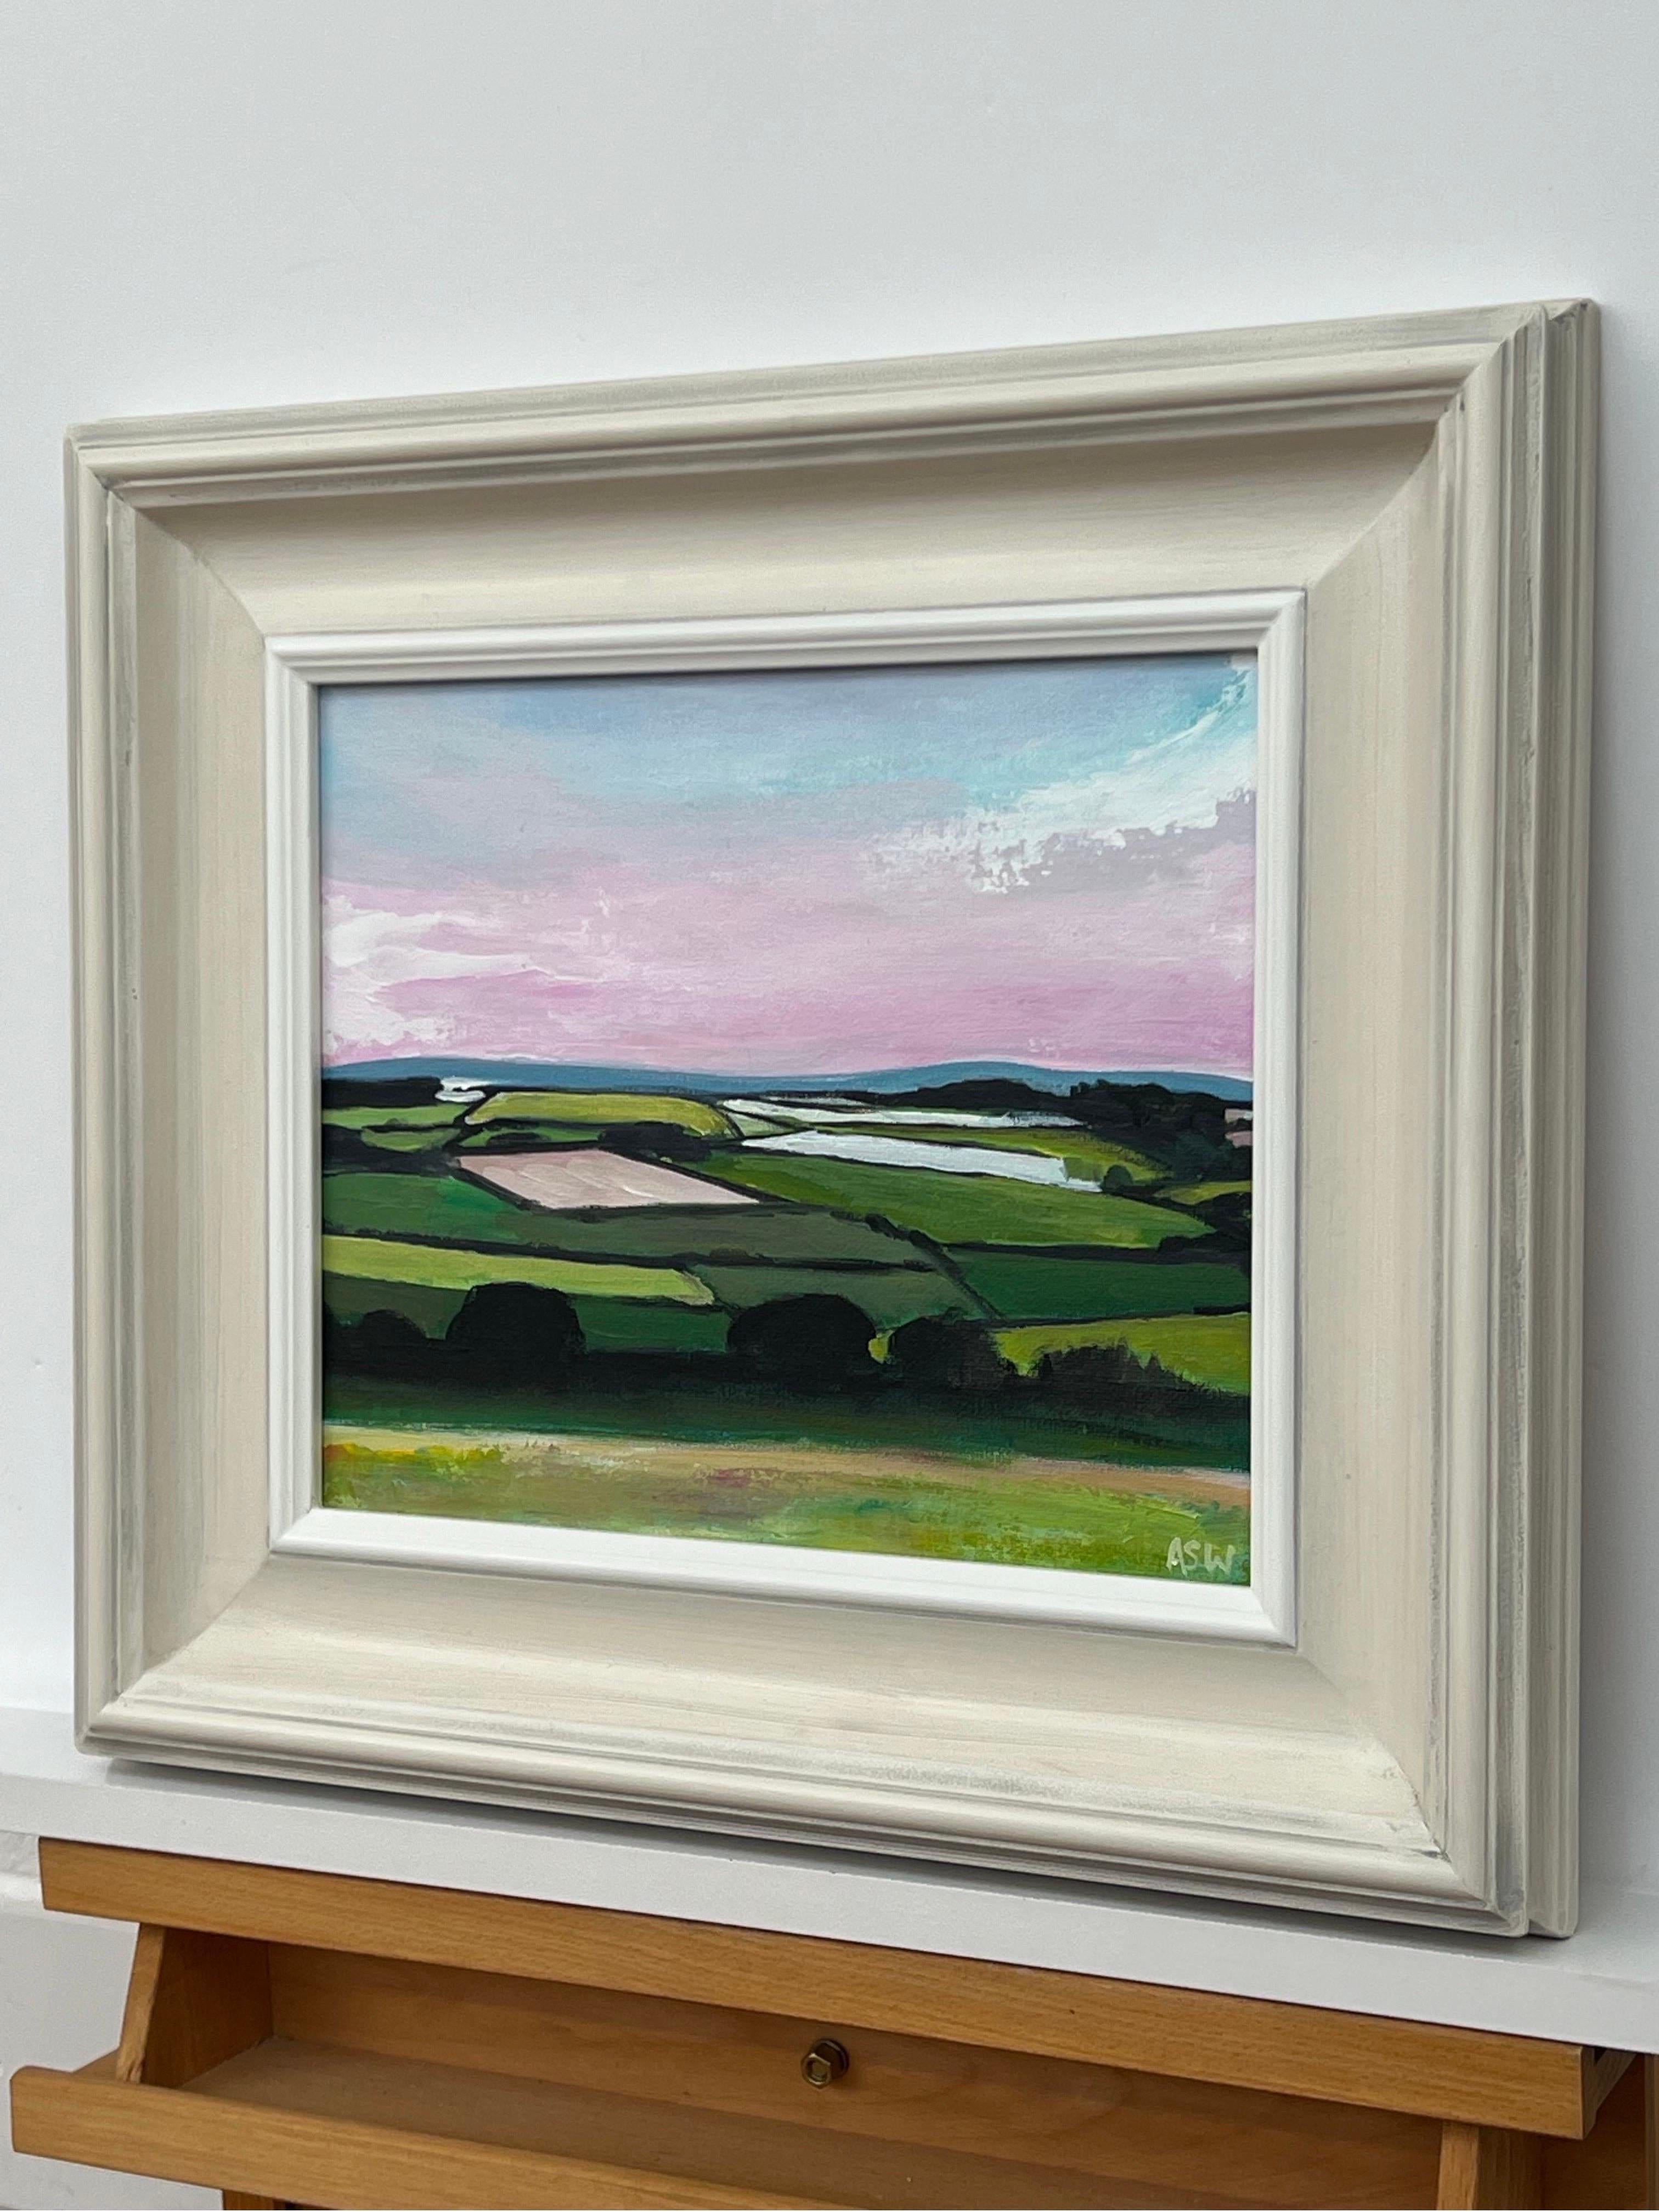 Patchwork quilt of vibrant green pasture, ploughed fields and farmland hedgerows with pink sky at dusk in the English Countryside by Contemporary British Artist, Angela Wakefield. 

Art measures 12 x 10 inches 
Frame measure 18 x 16 inches 

Angela